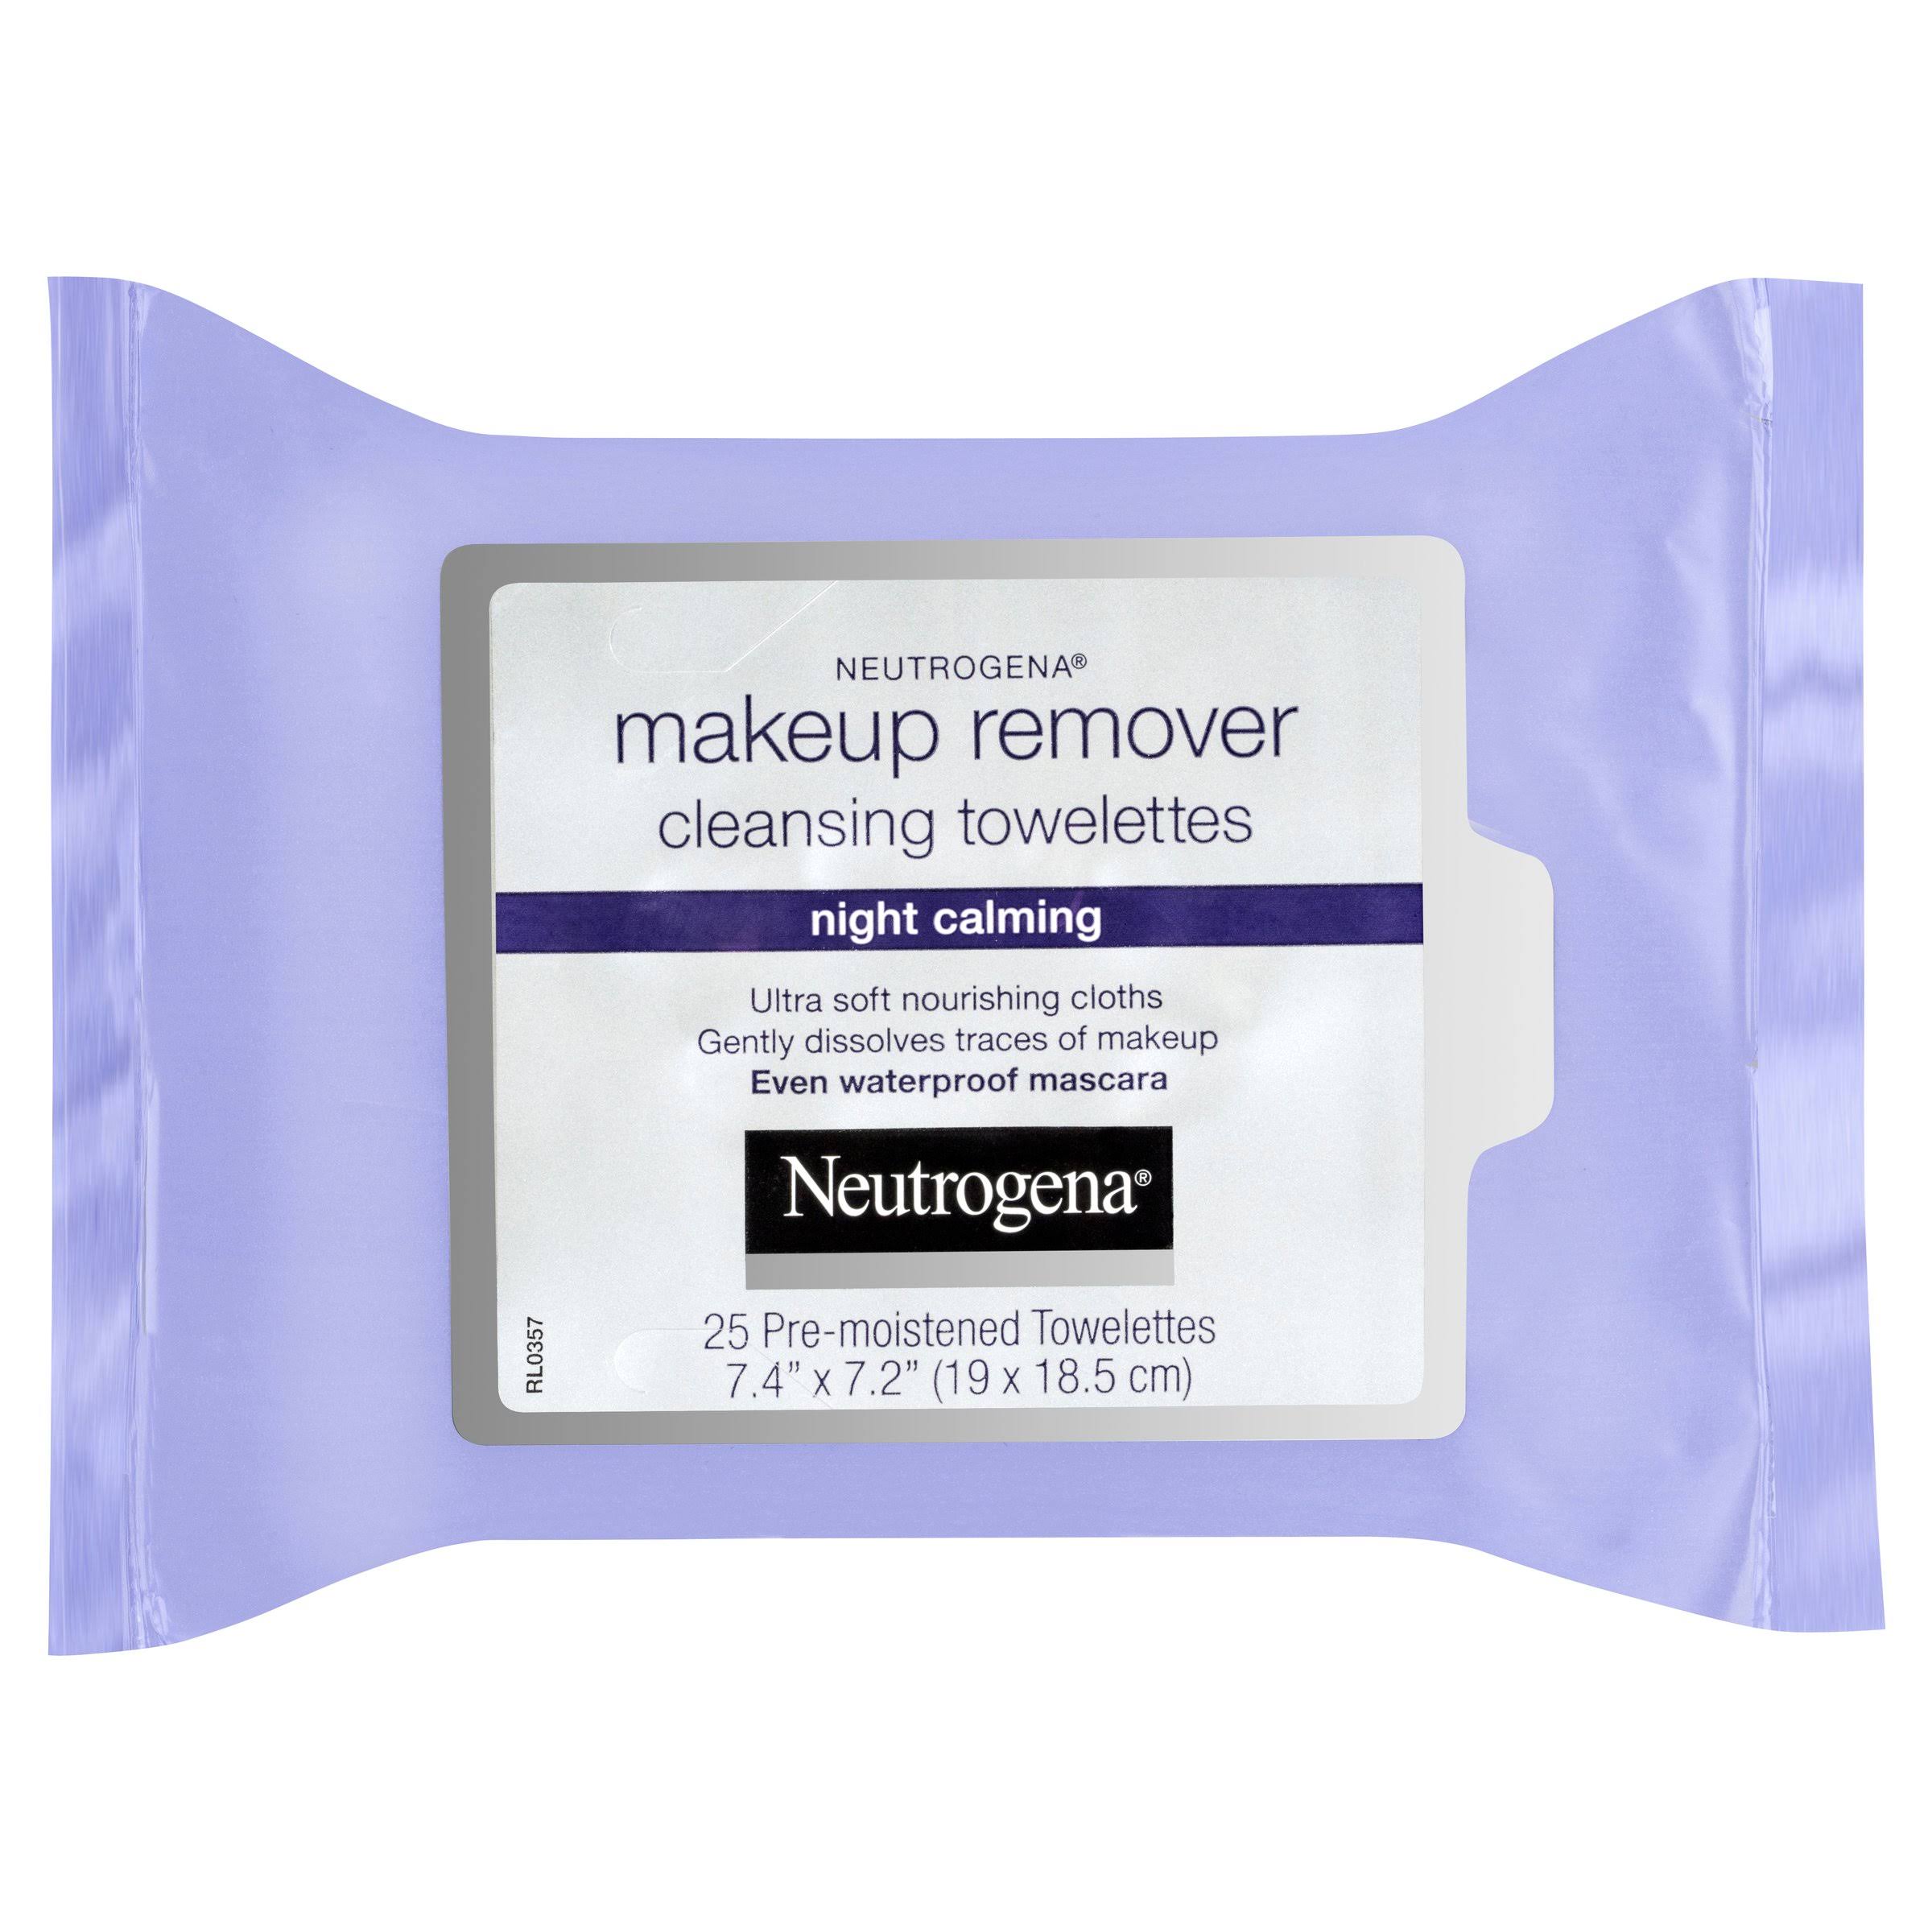 Neutrogena Makeup Remover Cleasing Towelettes - Night Calming, x25